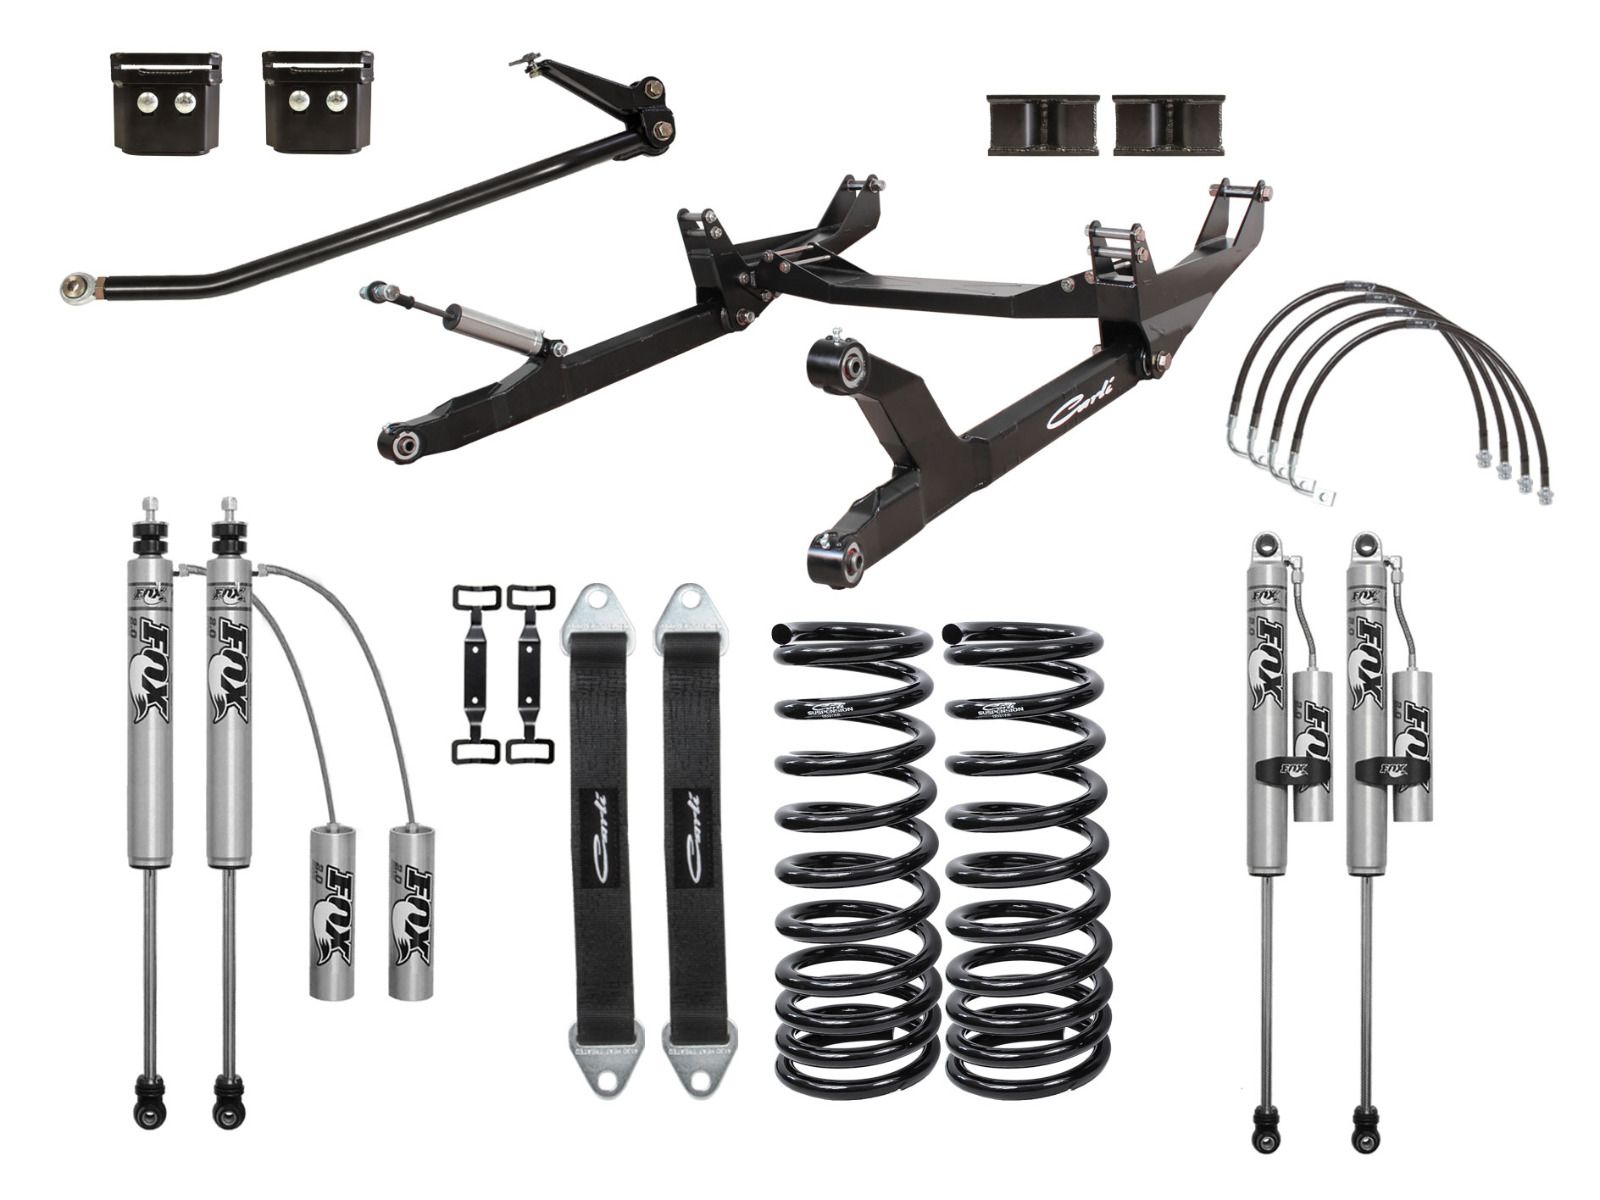 6" 2010-2011 Dodge Ram 2500 4wd (w/Diesel Engine) Backcountry Lift System by Carli Suspension